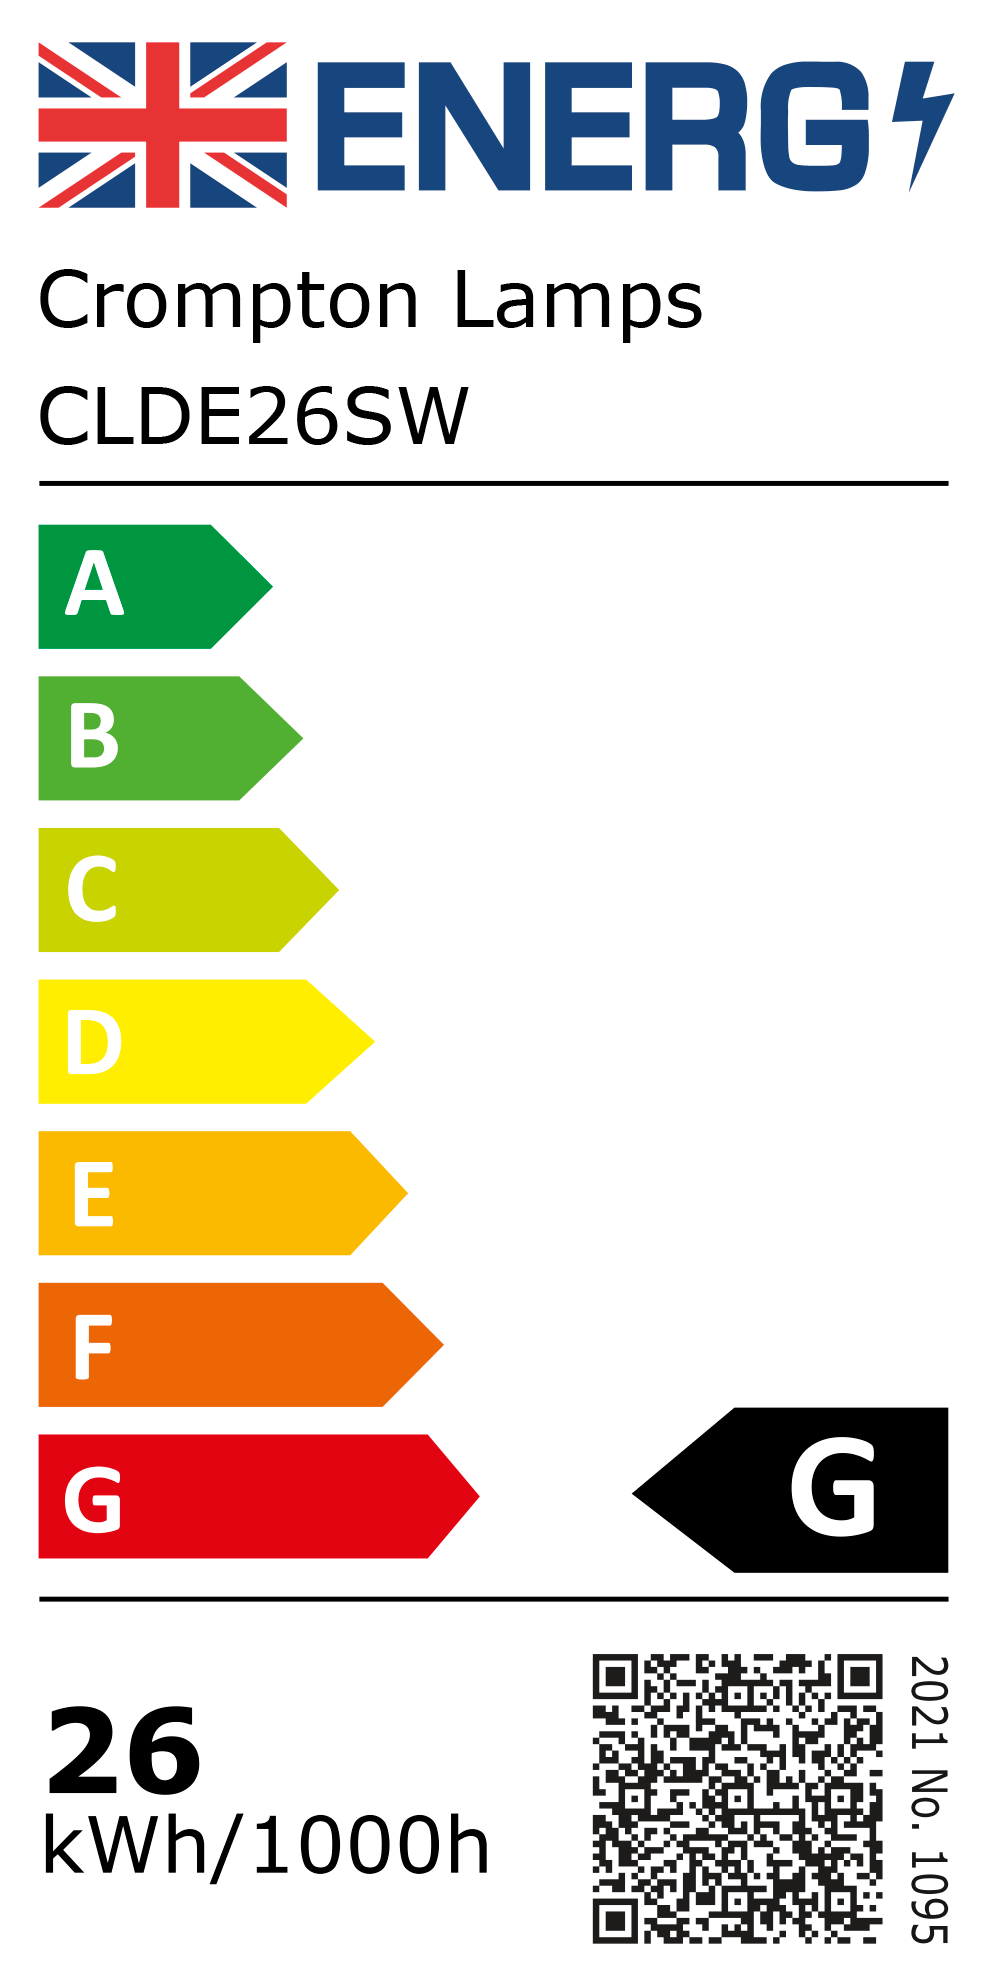 New 2021 Energy Rating Label: Stock Code CLDE26SW